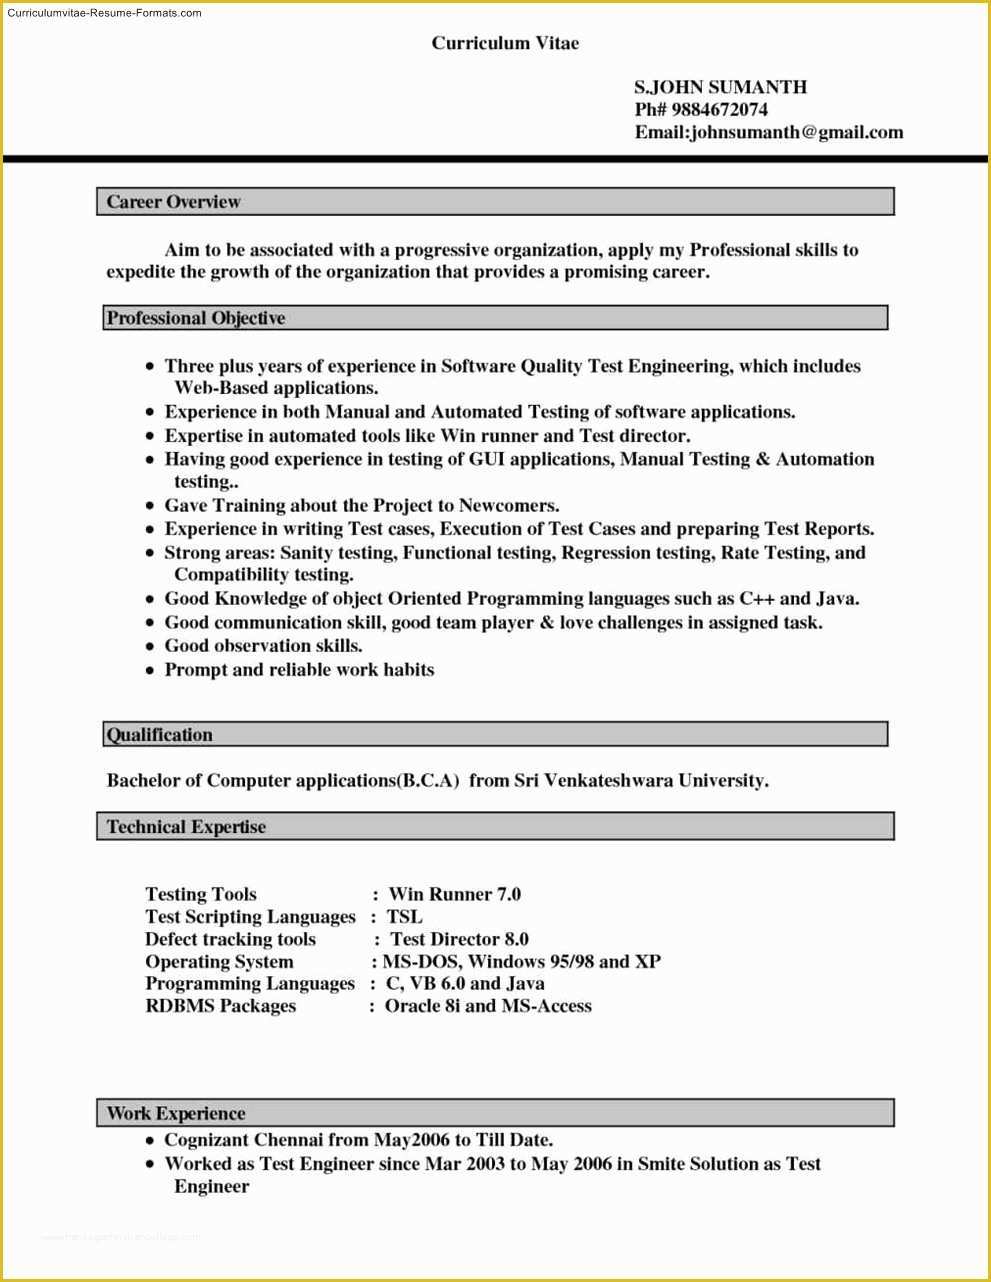 Resume Templates Free Download Word 2007 Of Free Resume Templates for Microsoft Word 2007 Free